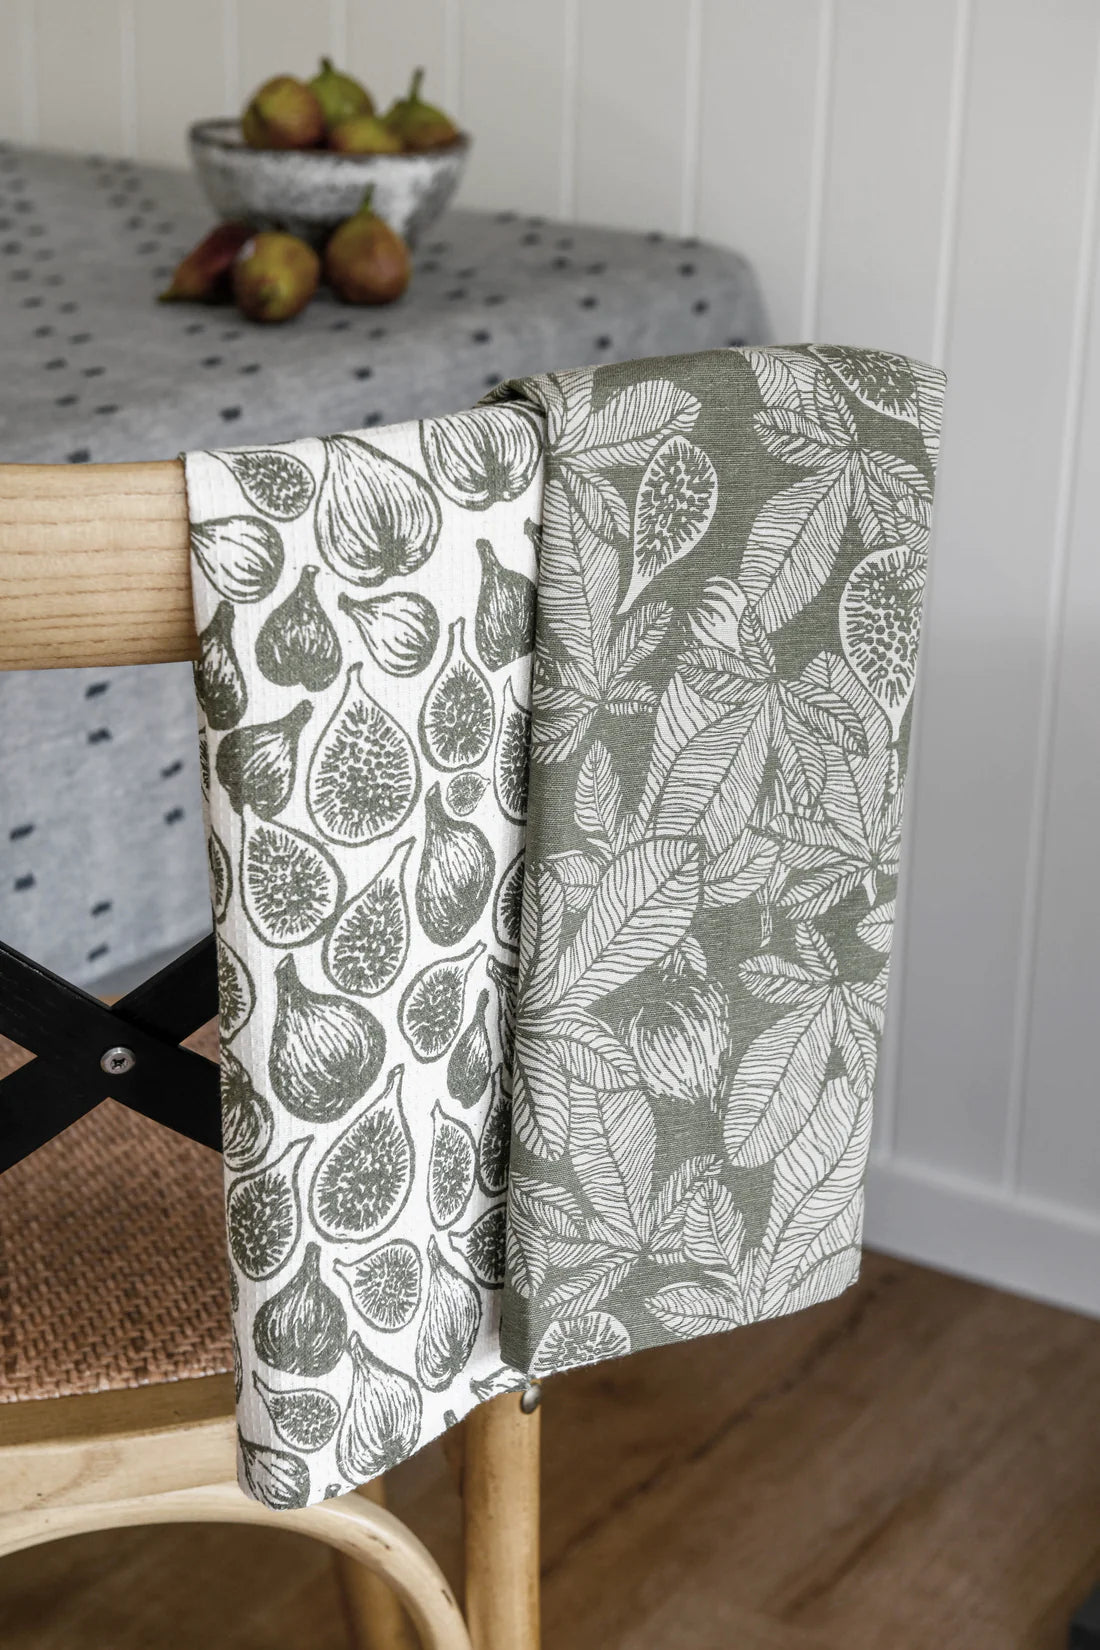 A set of 4 beautiful tea towels, each screen printed with a hand drawn myrtle flower design.